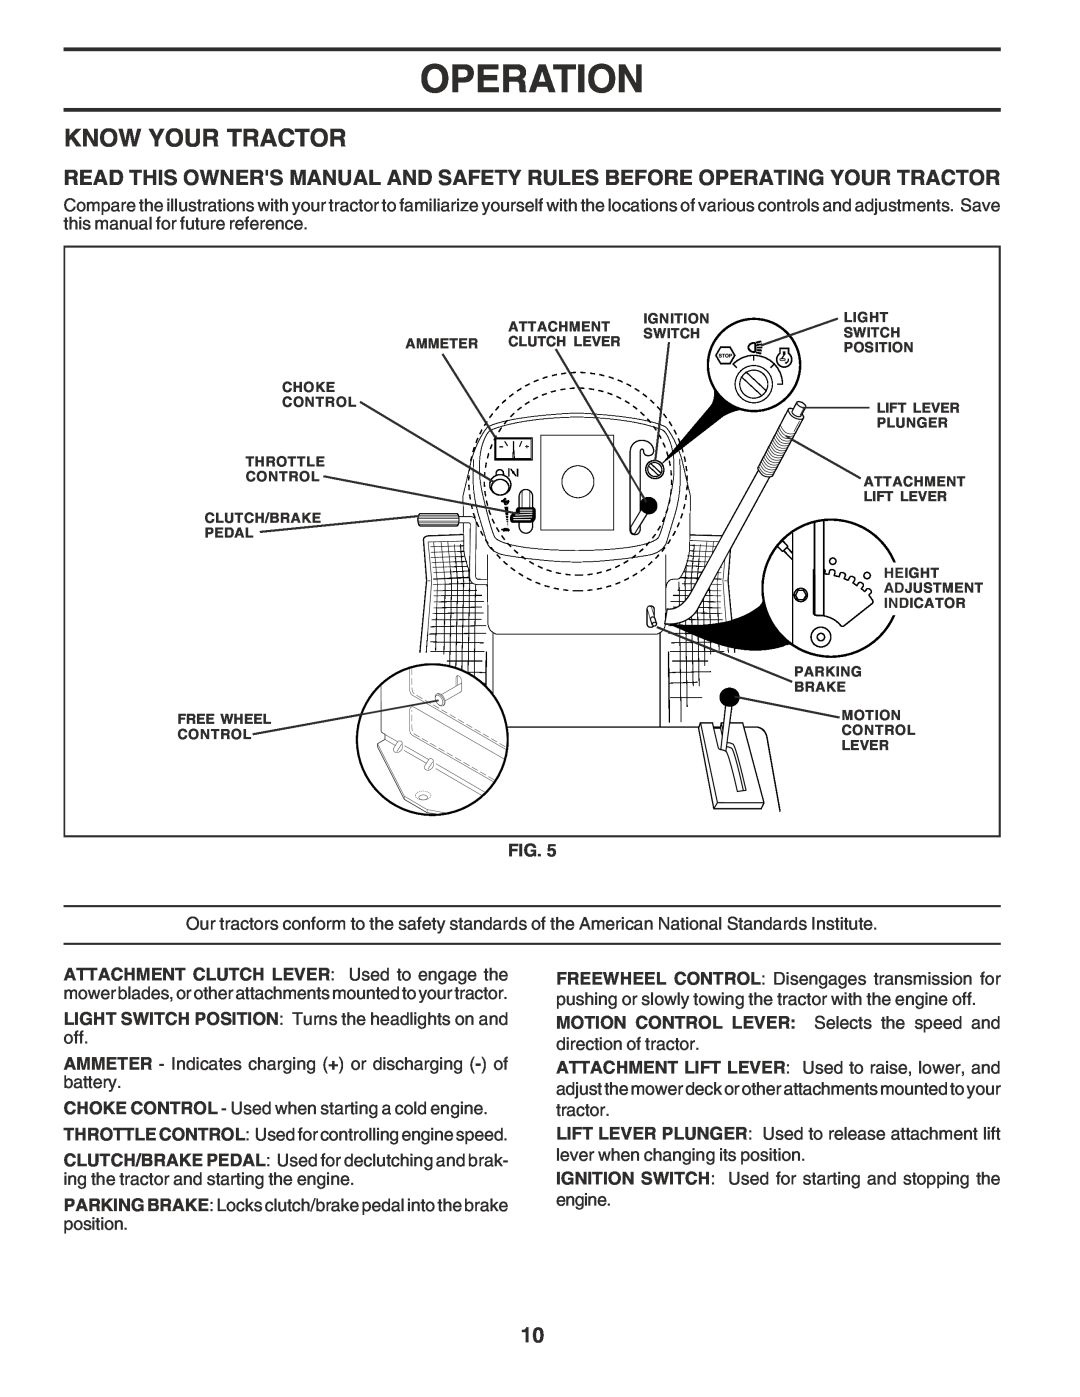 Poulan 182770 owner manual Know Your Tractor, Operation 